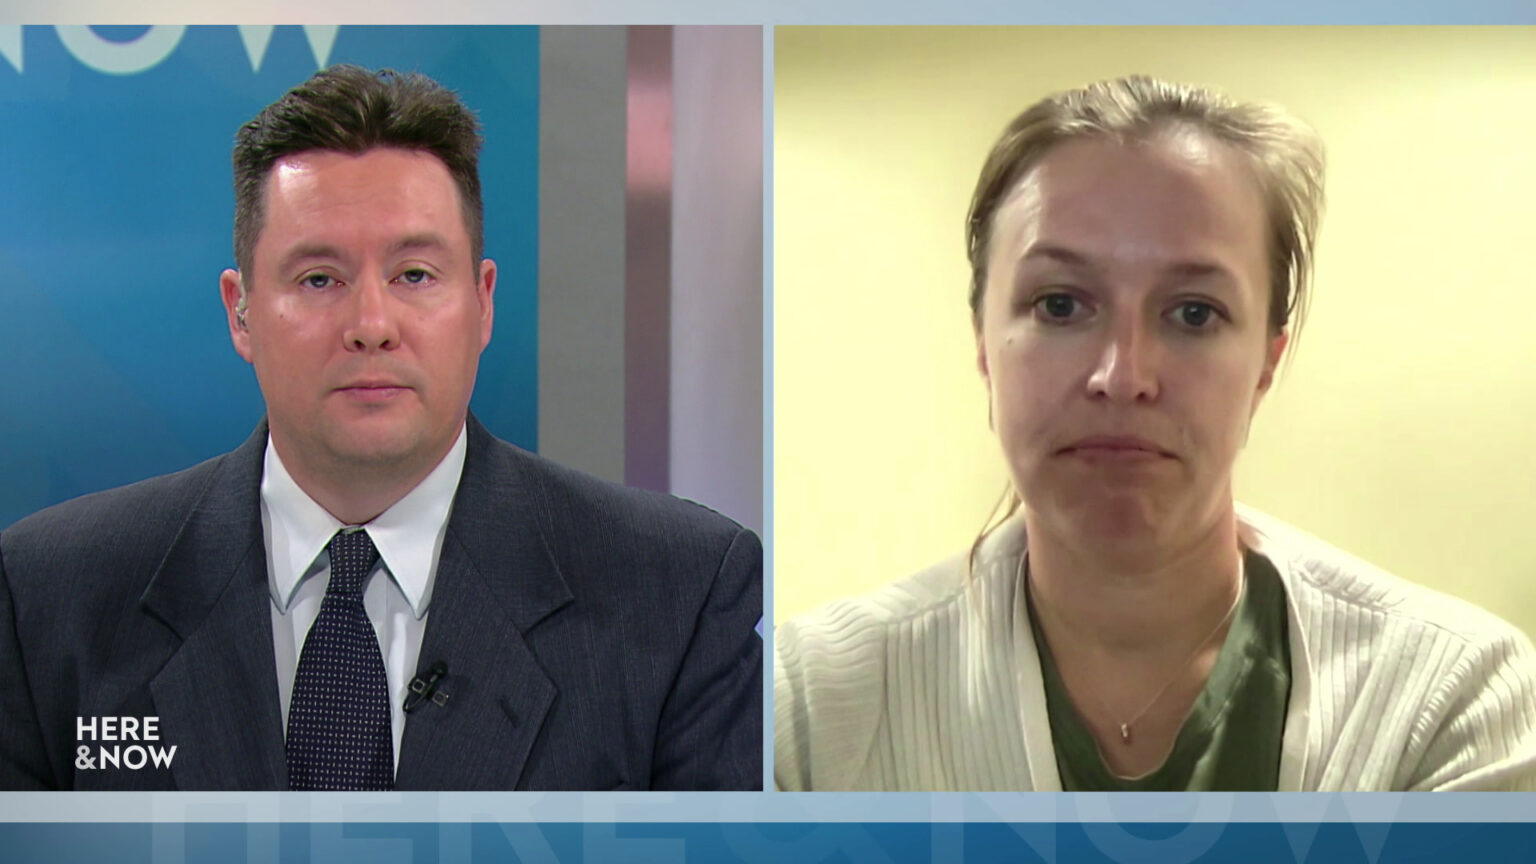 A split screen shows Zac Schultz and Dr. Amy Domeyer in different locations.